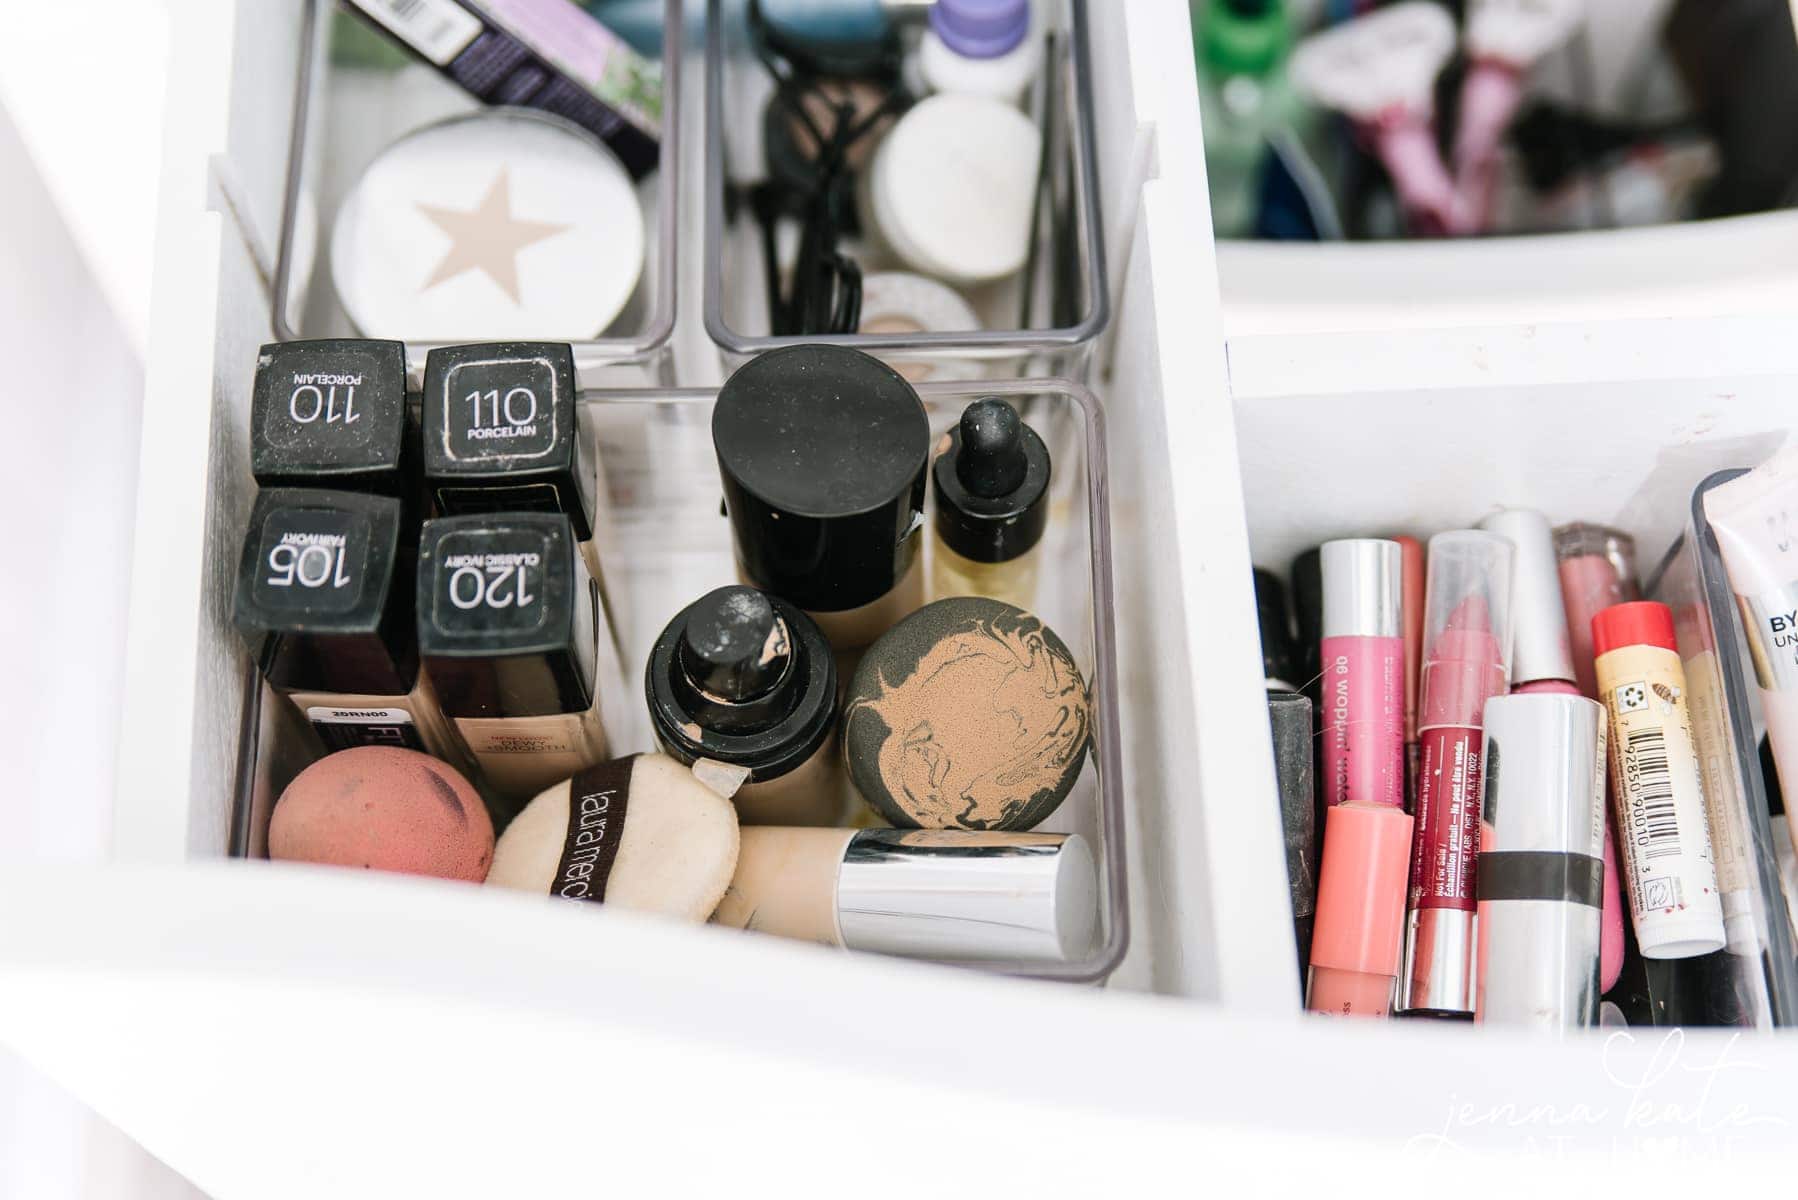 Organize bathroom drawers full of makeup and toiletries